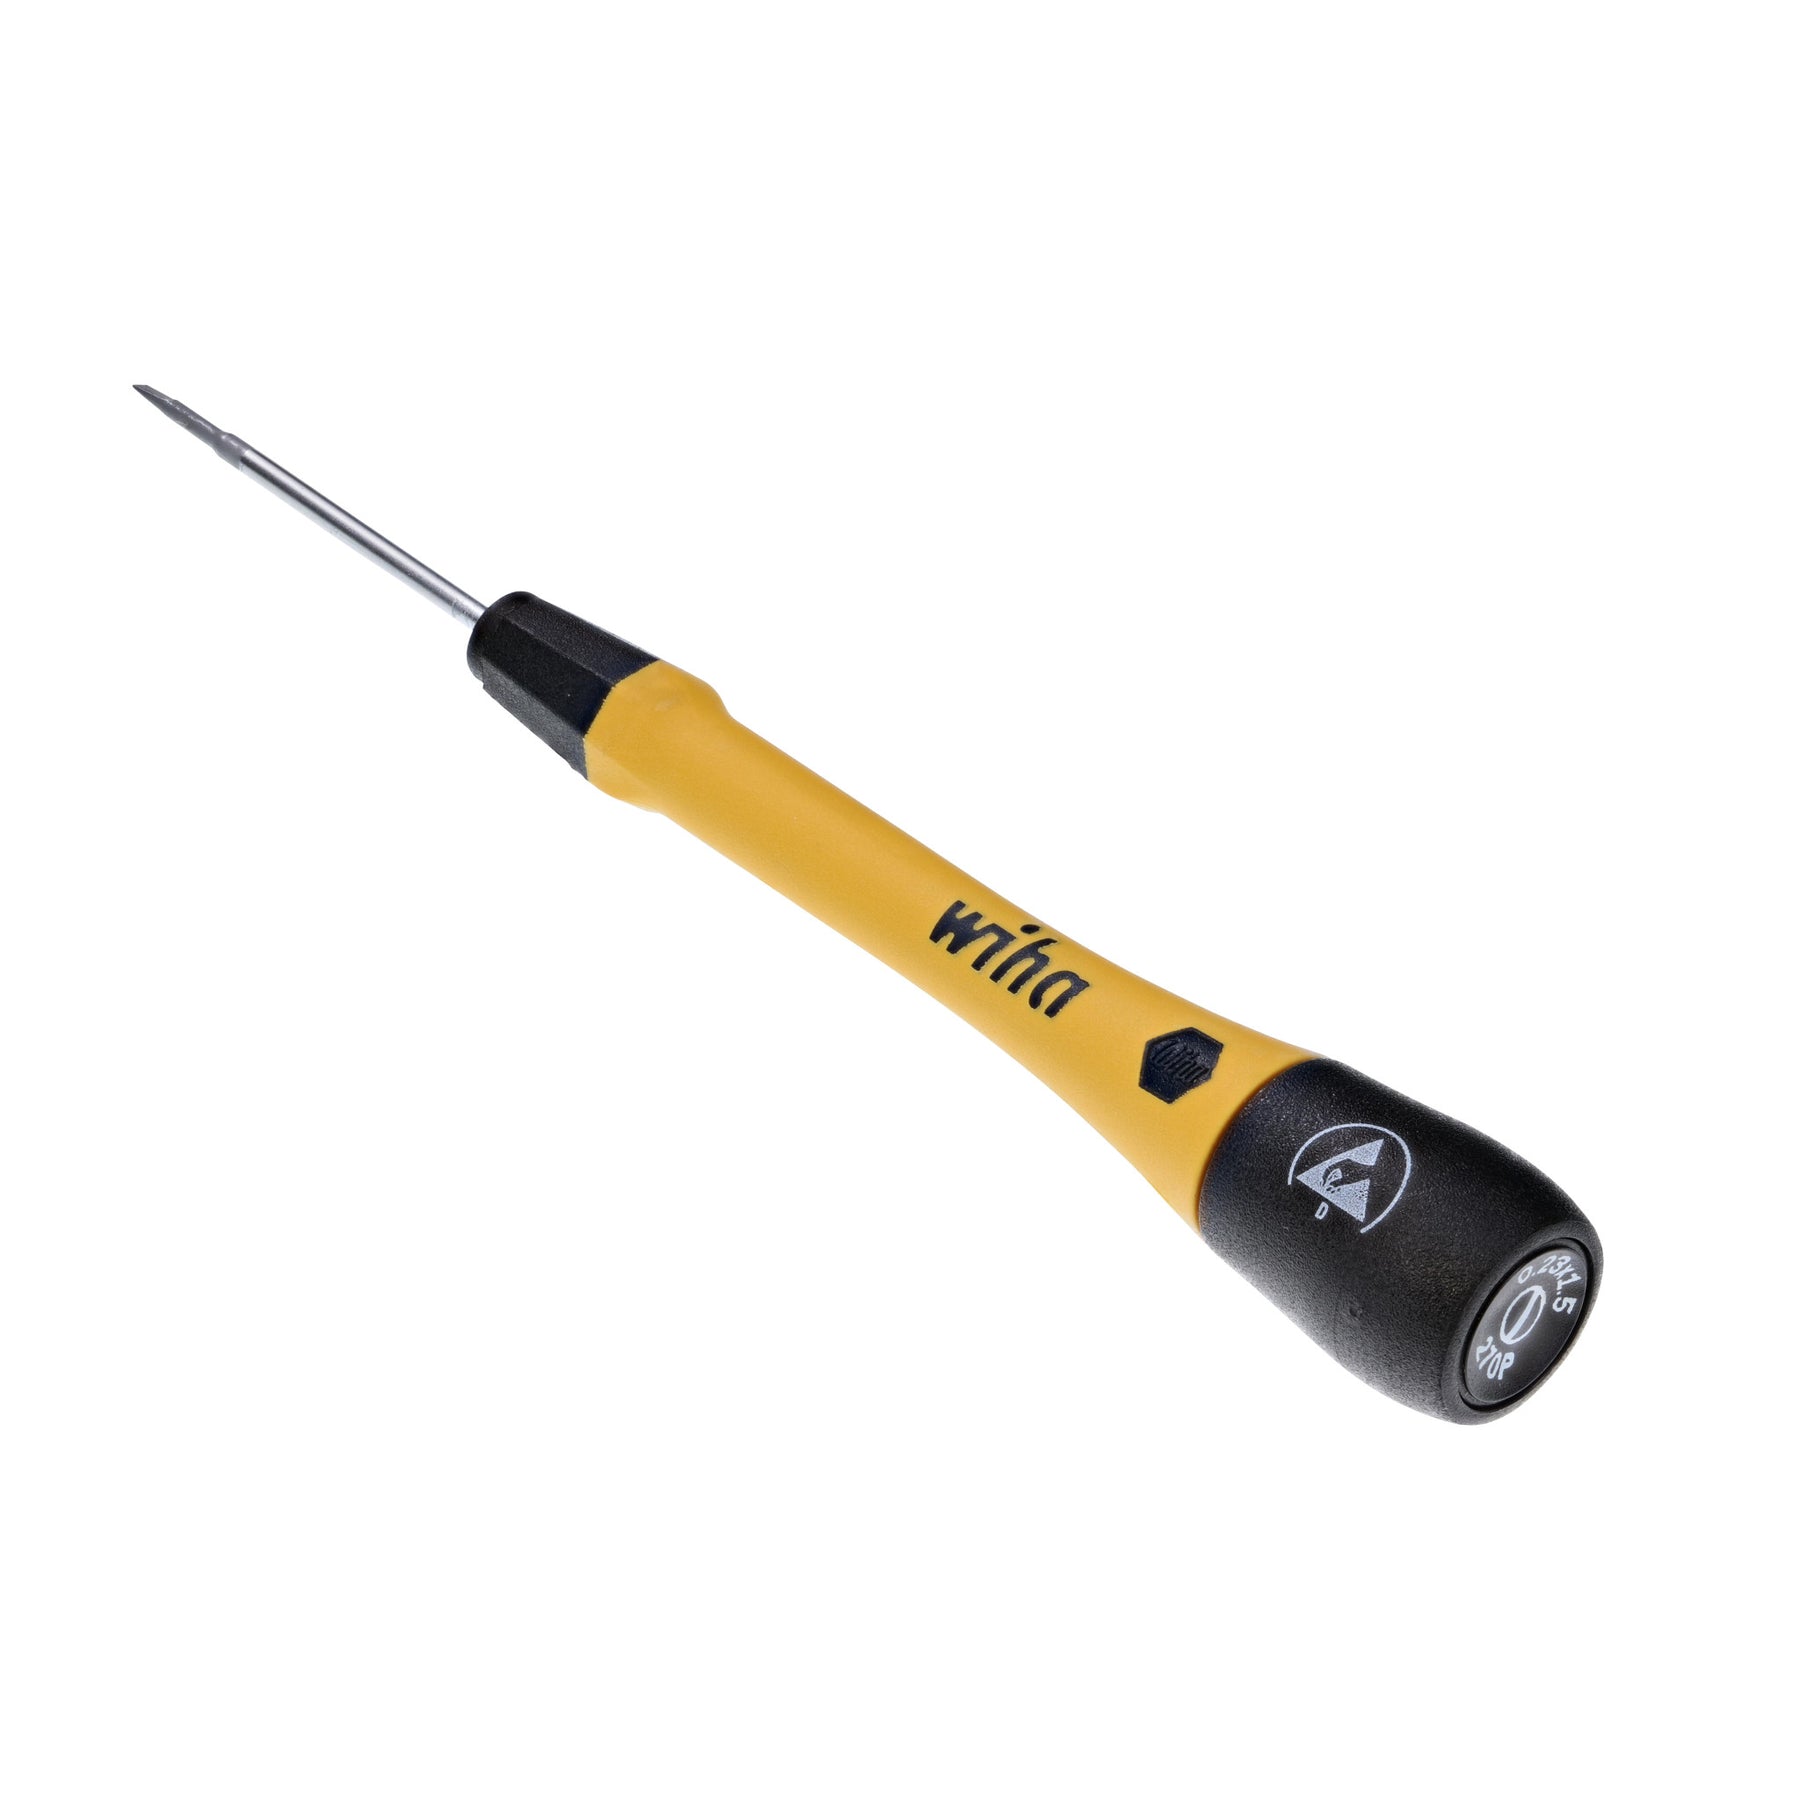 ESD Safe PicoFinish Precision Screwdriver - Slotted 1.5mm x 40mm